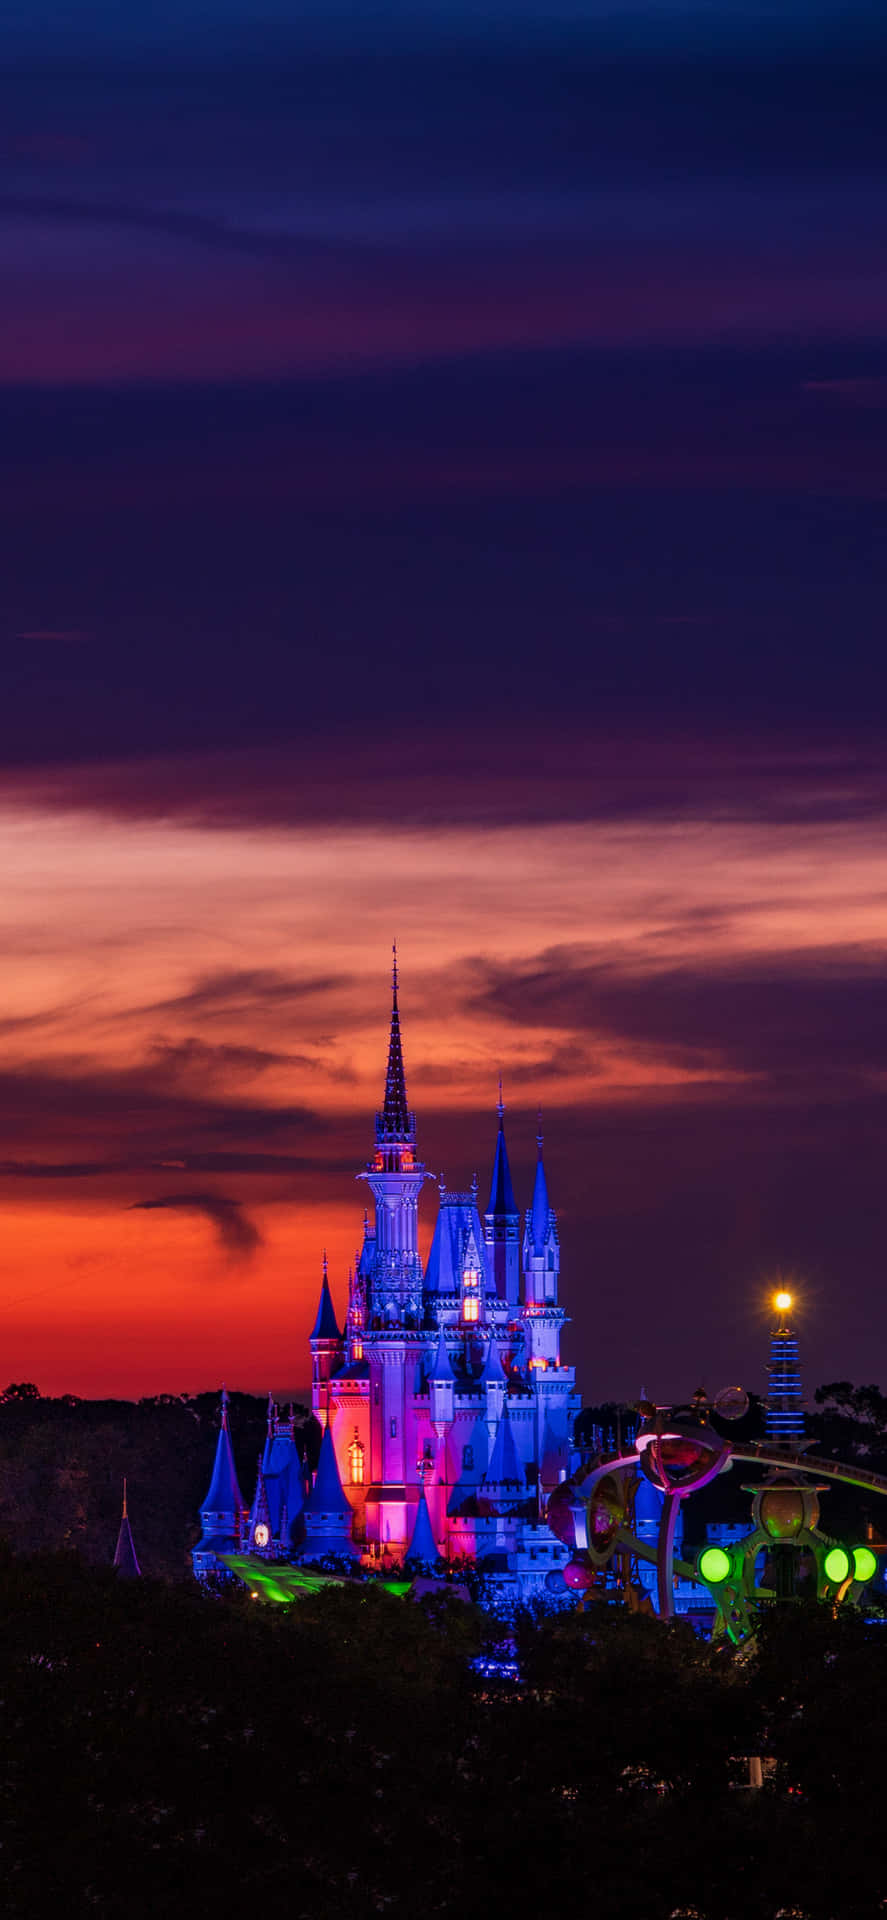 Disney World From Afar Android Wallpaper